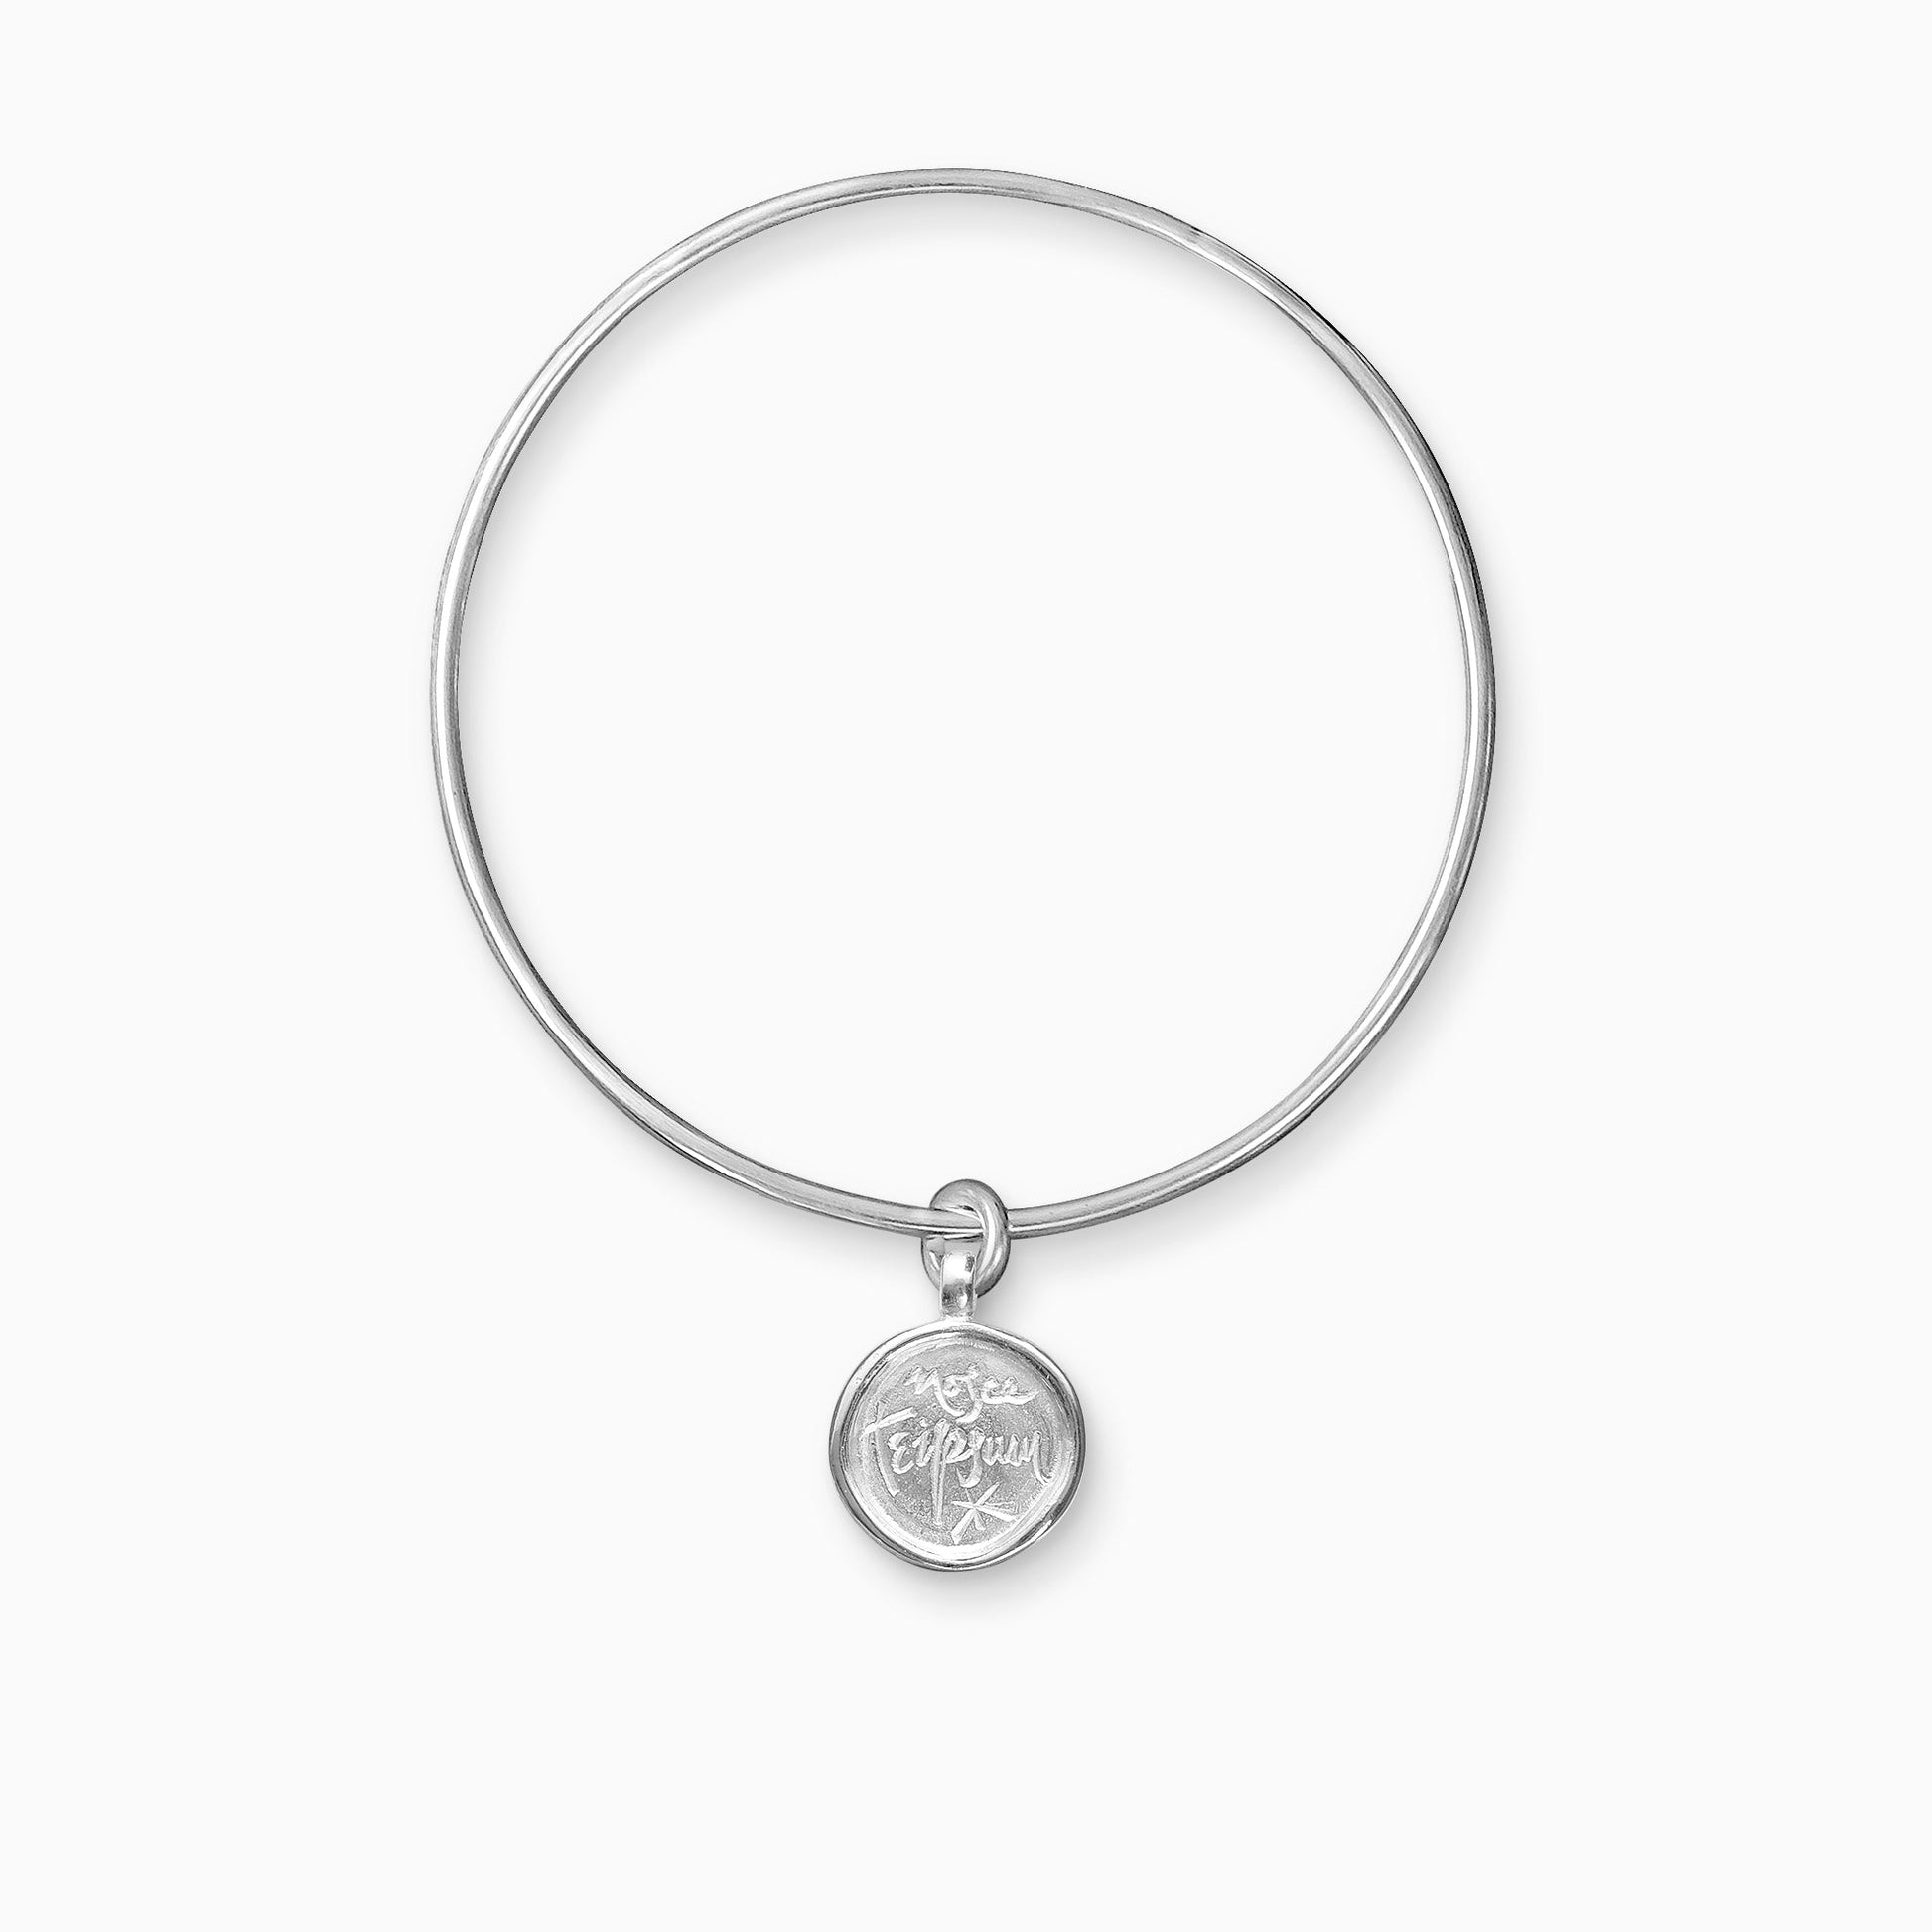 A recycled Silver round charm with a raised edge engraved with ‘Know Thyself’ freely moving on a round wire bangle.  Charm 15mm. Bangle 63mm inside diameter x 2mm round wire.